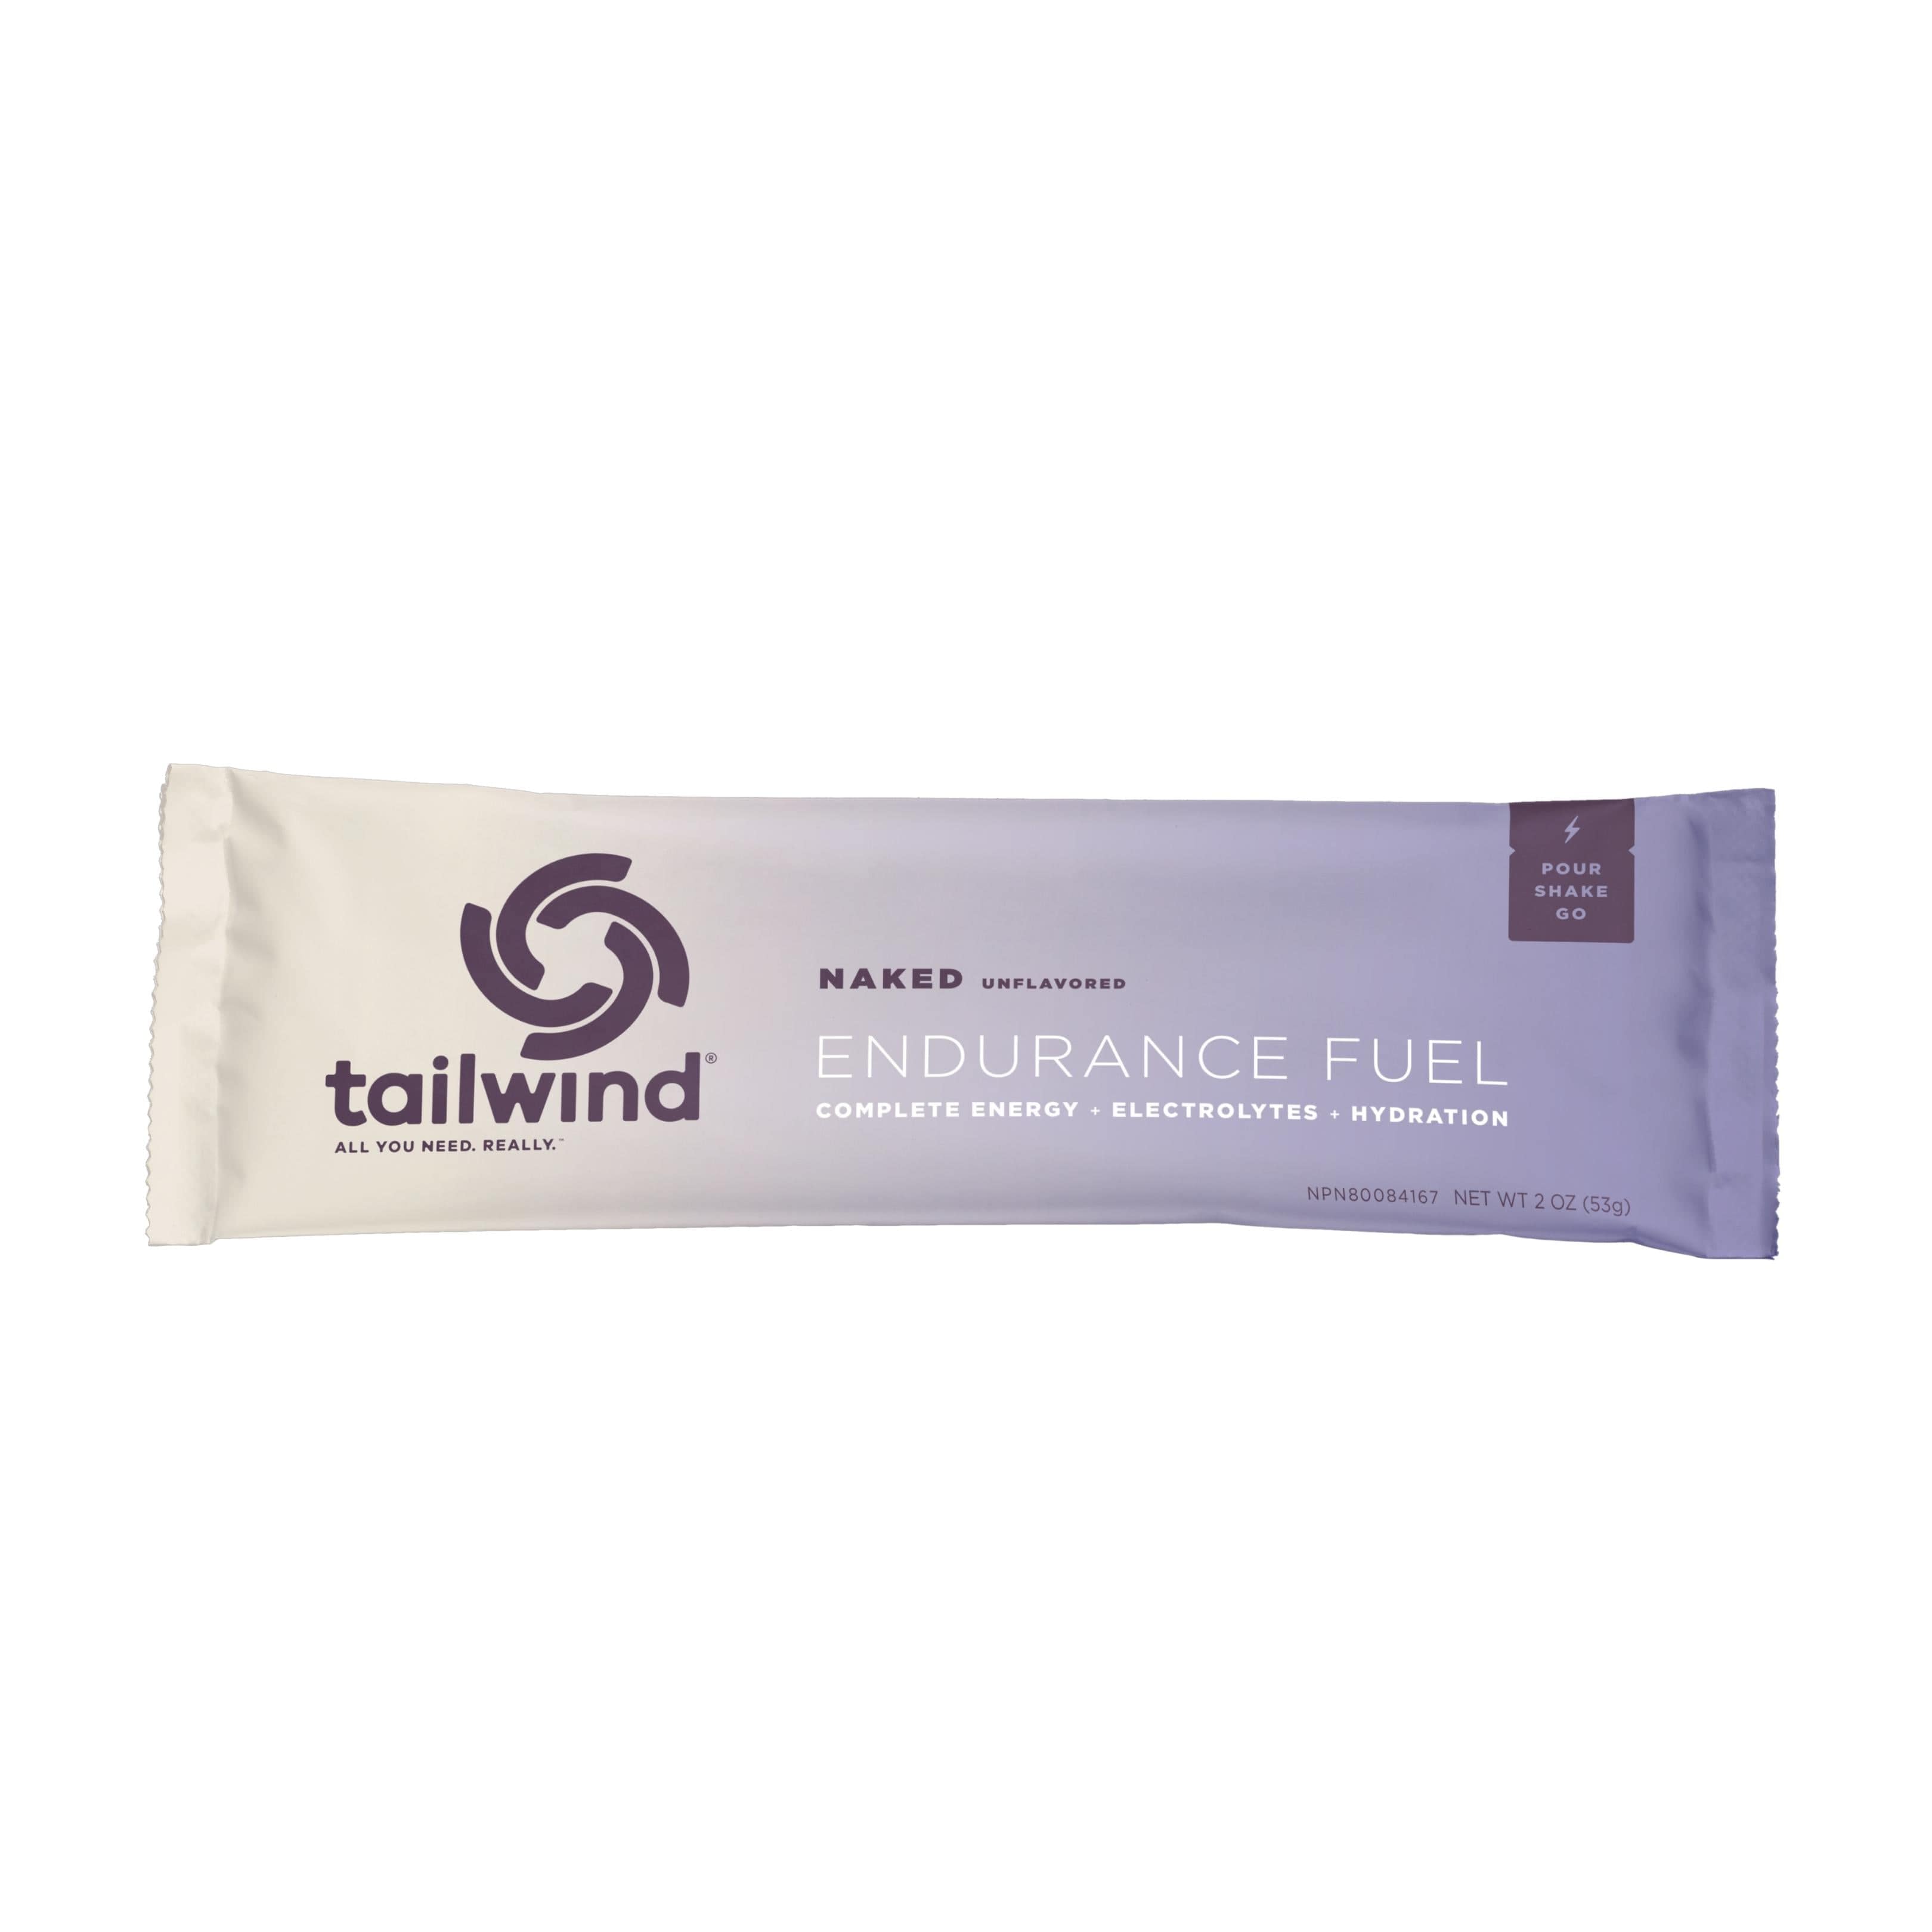 tailwind Nutrition Supplement Stick (2 servings) / Naked (Unflavoured) Endurance Fuel Drink Mix 8 55283 00503 3